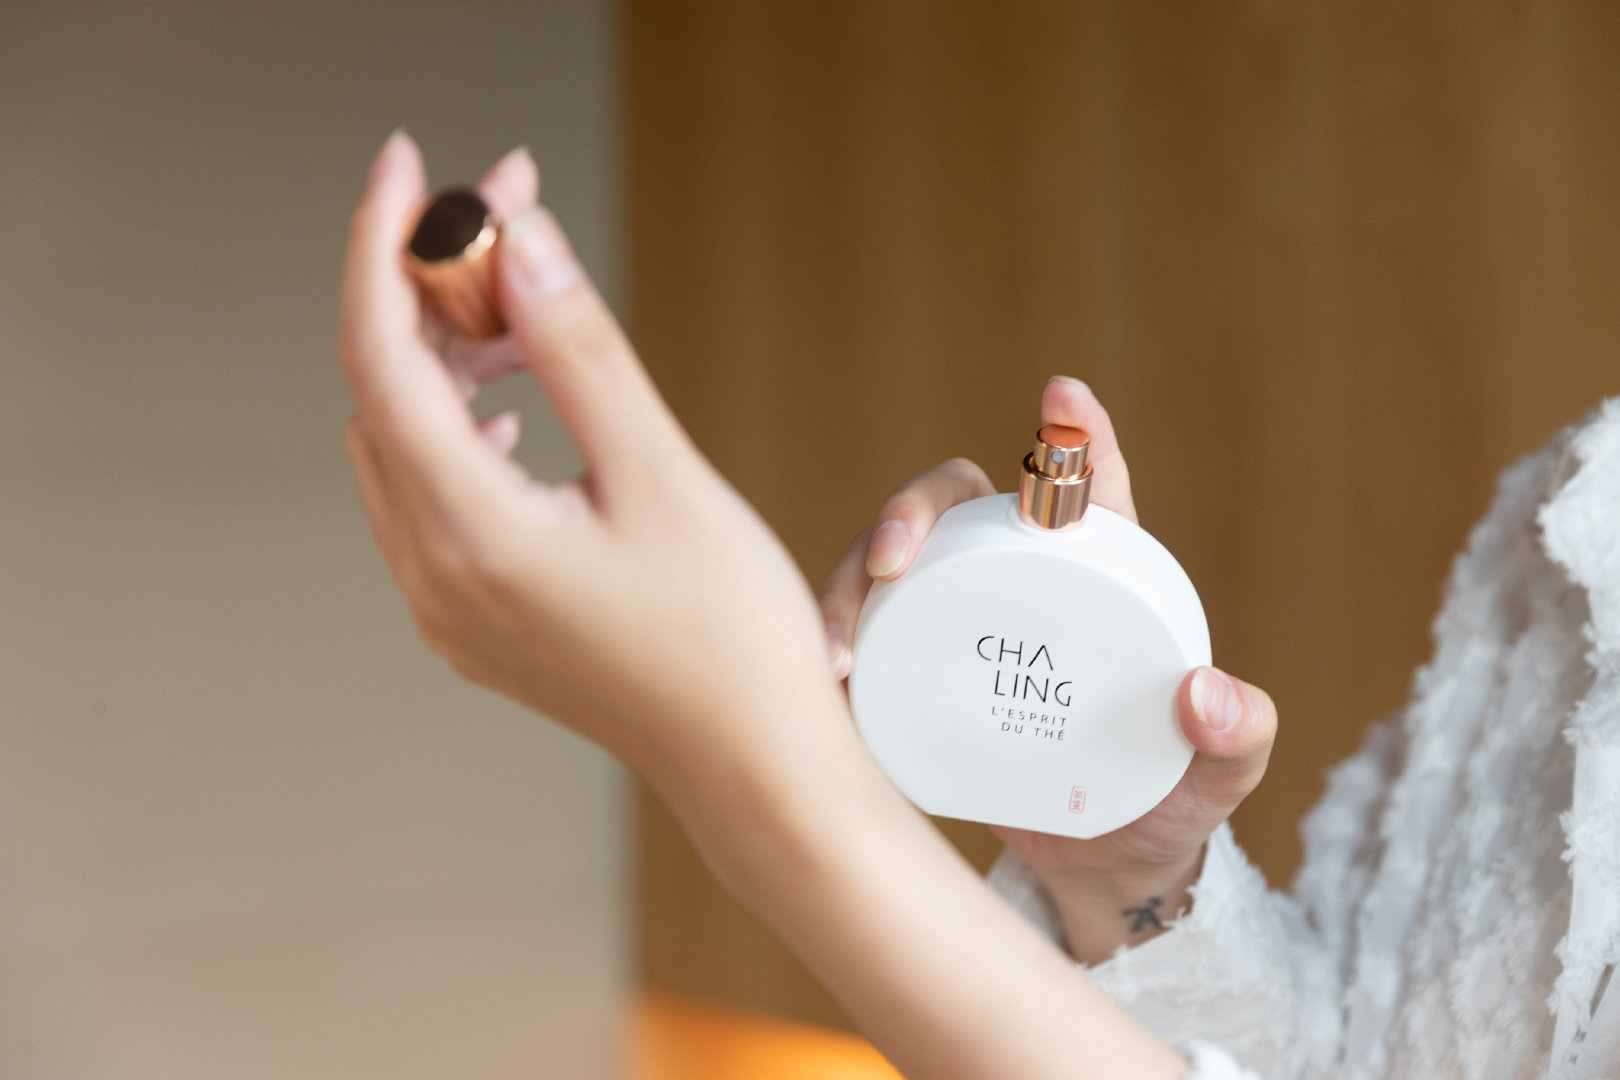 LVMH-owned beauty brand Cha Ling closes offline stores in China